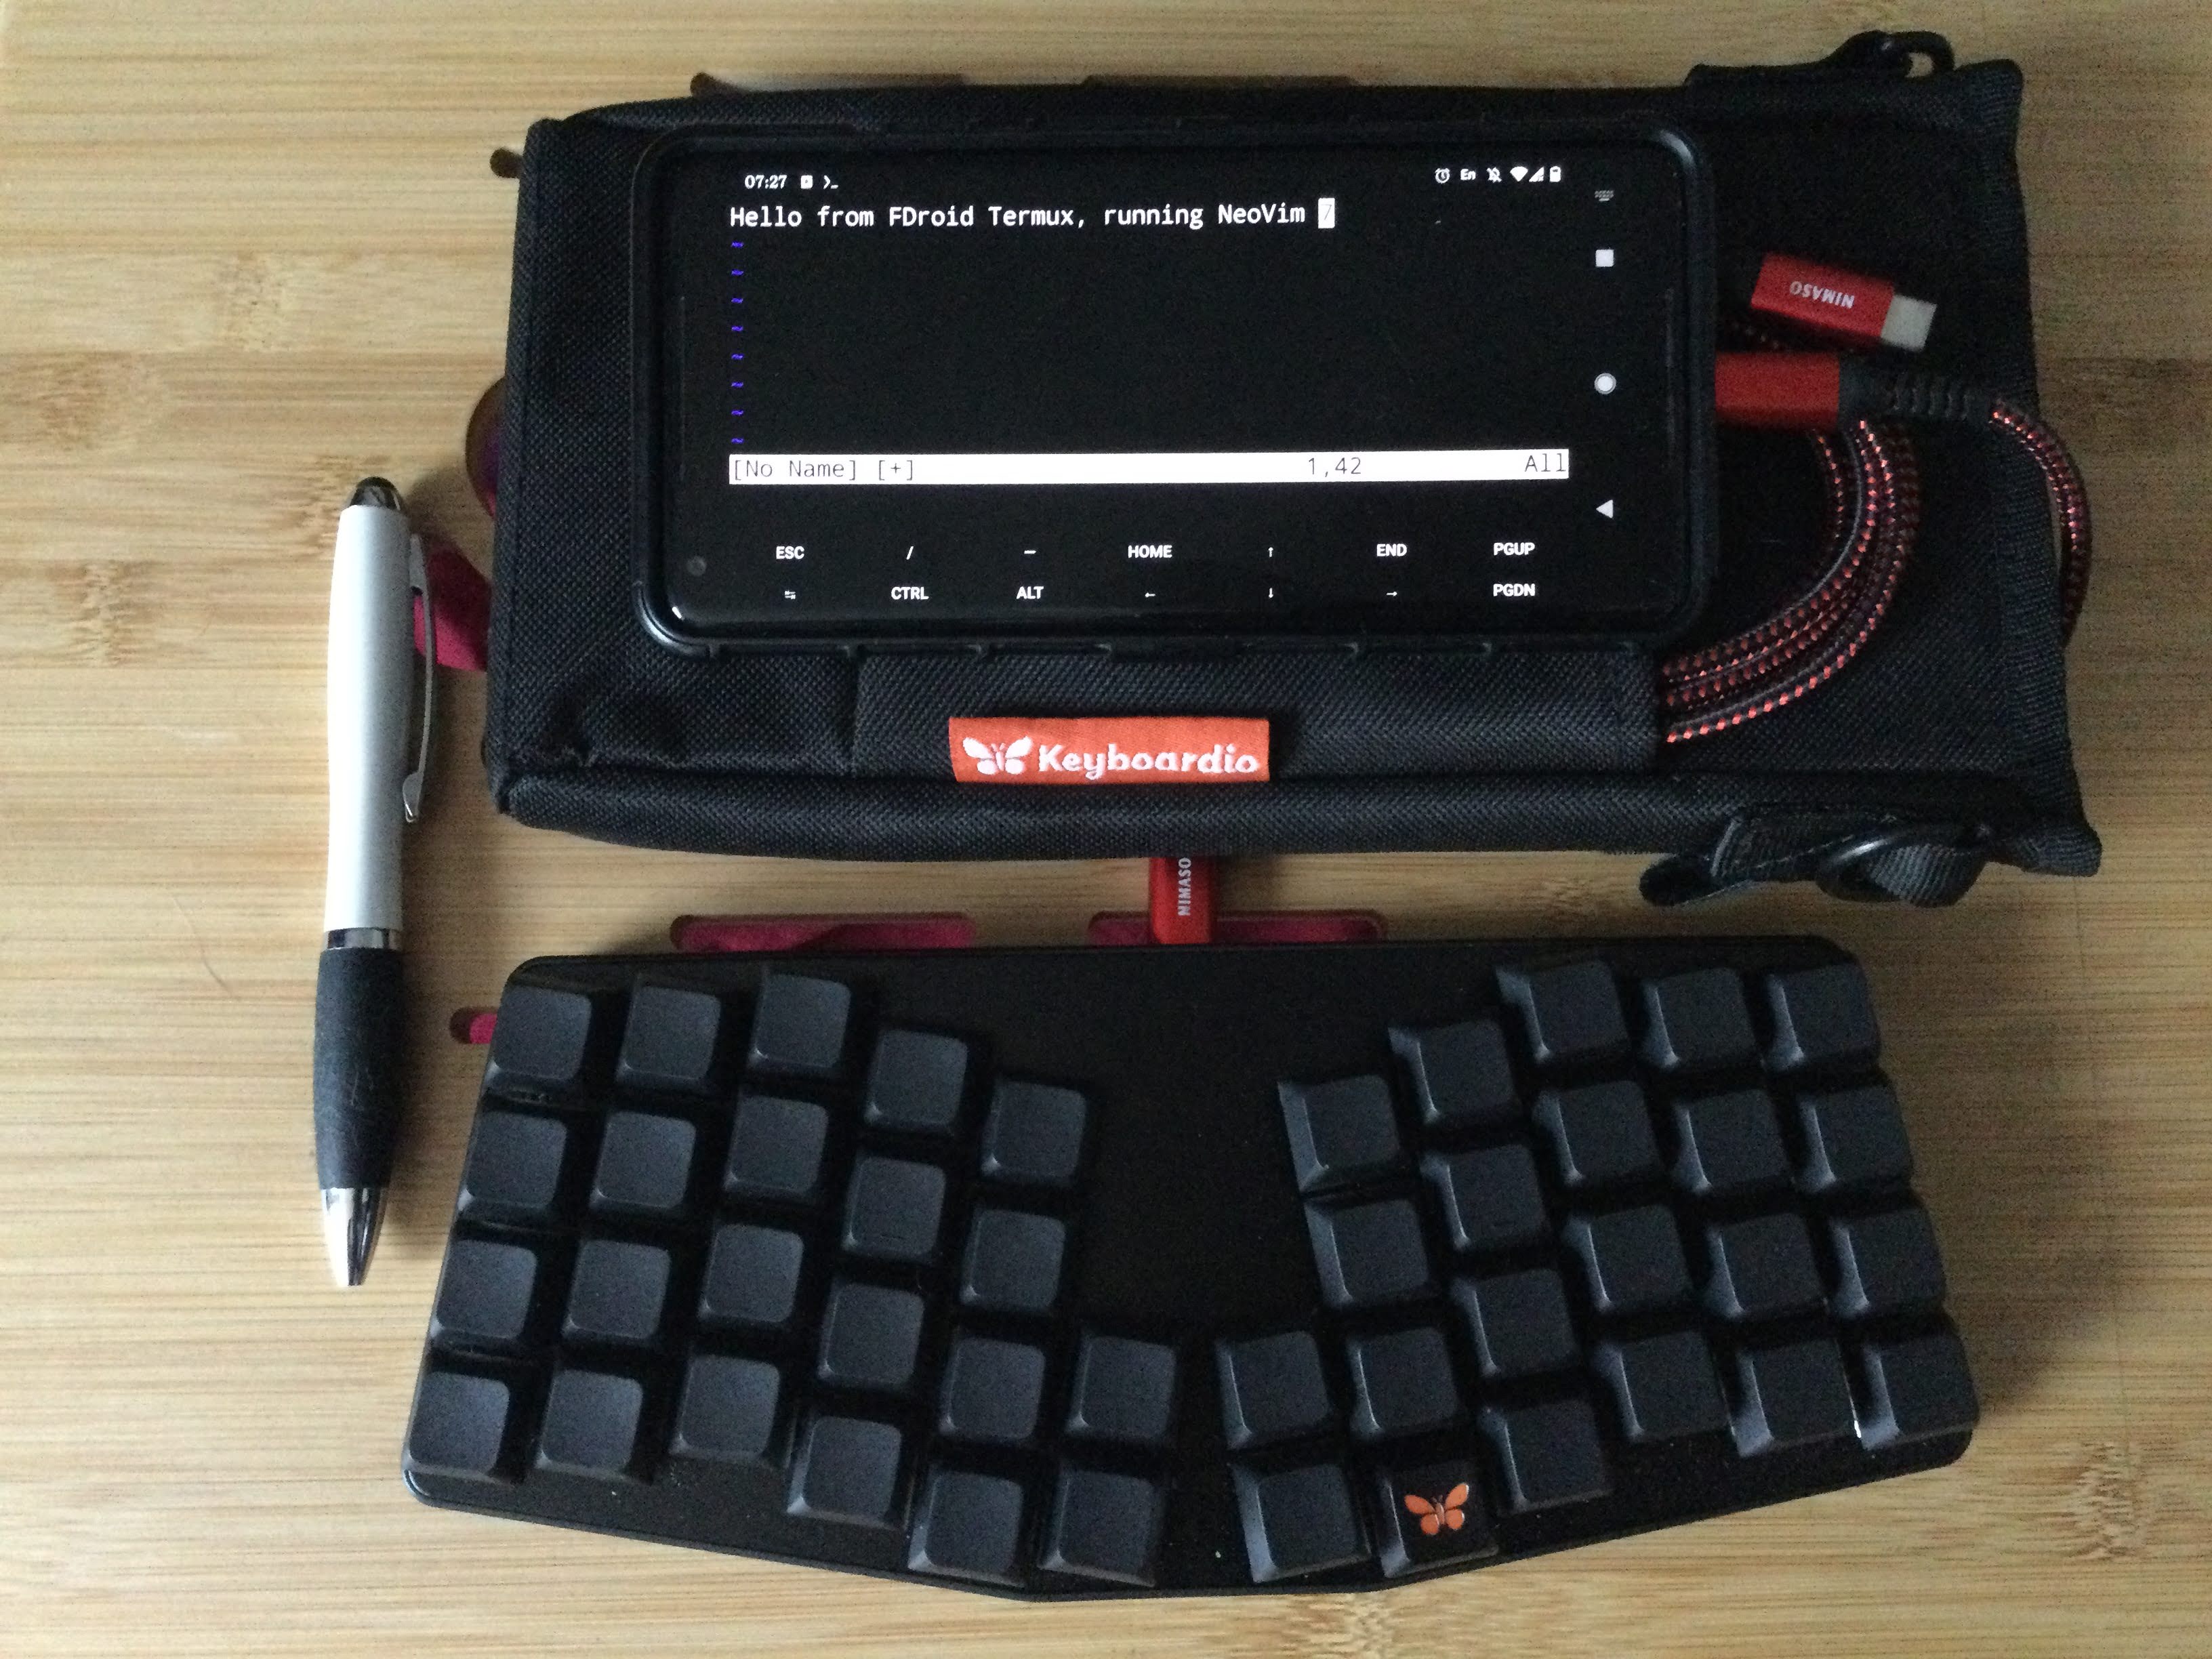 Ultra-mobile development environment - android with Termux and NeoVim with Keyboardio Atreus keyboard